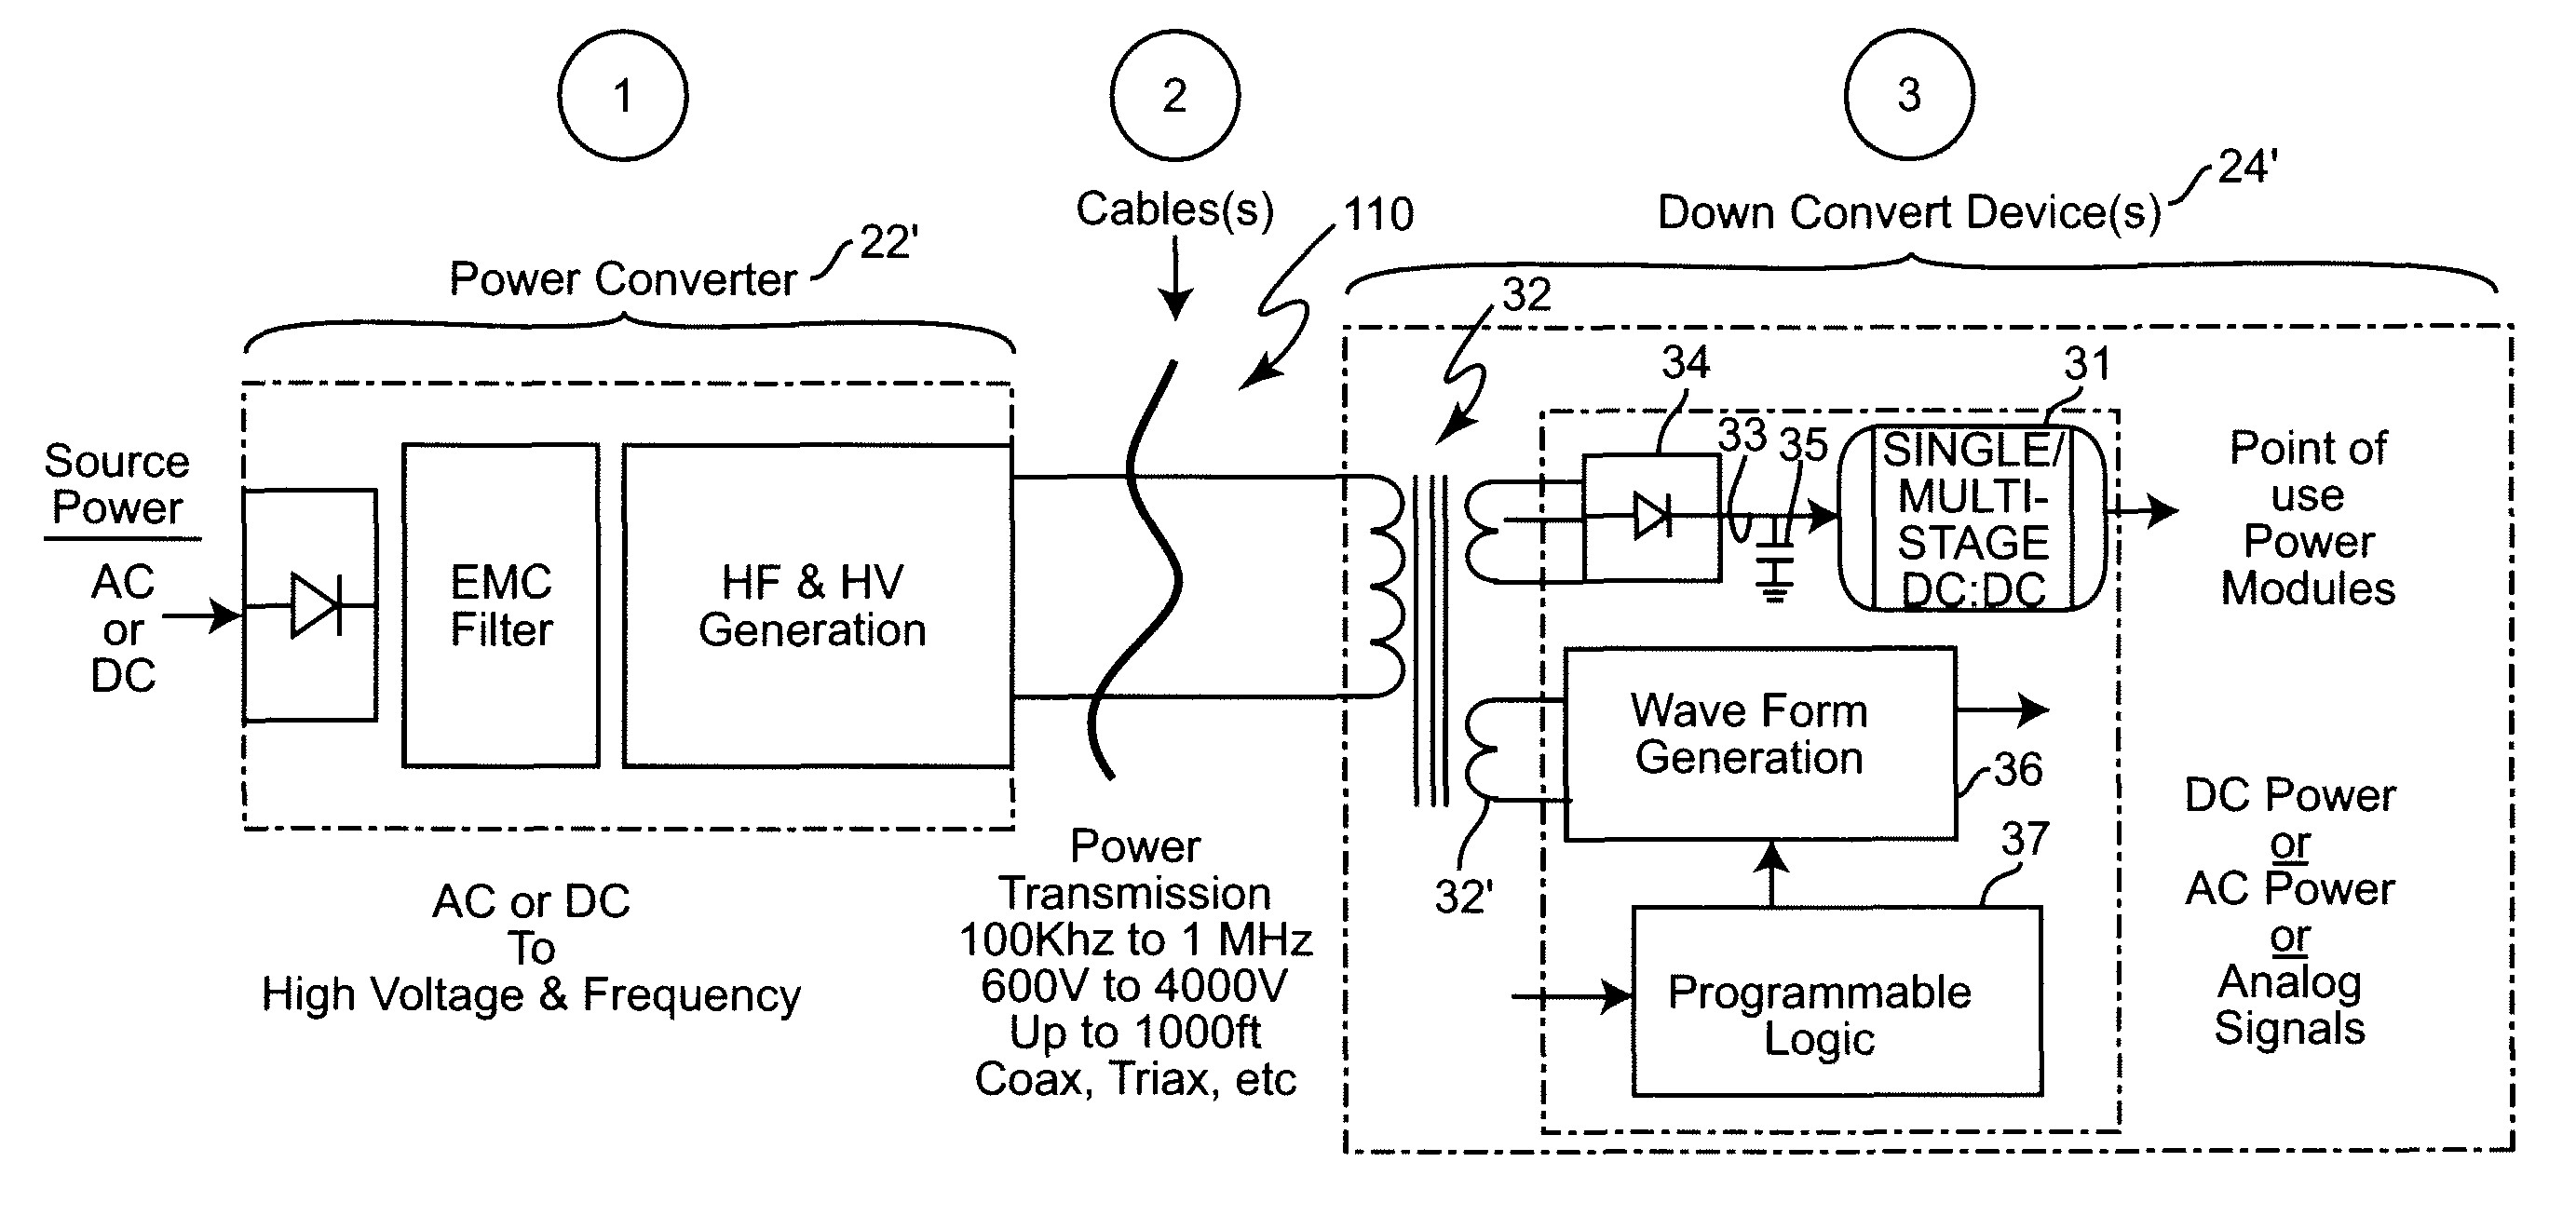 High voltage and frequency distributed power system